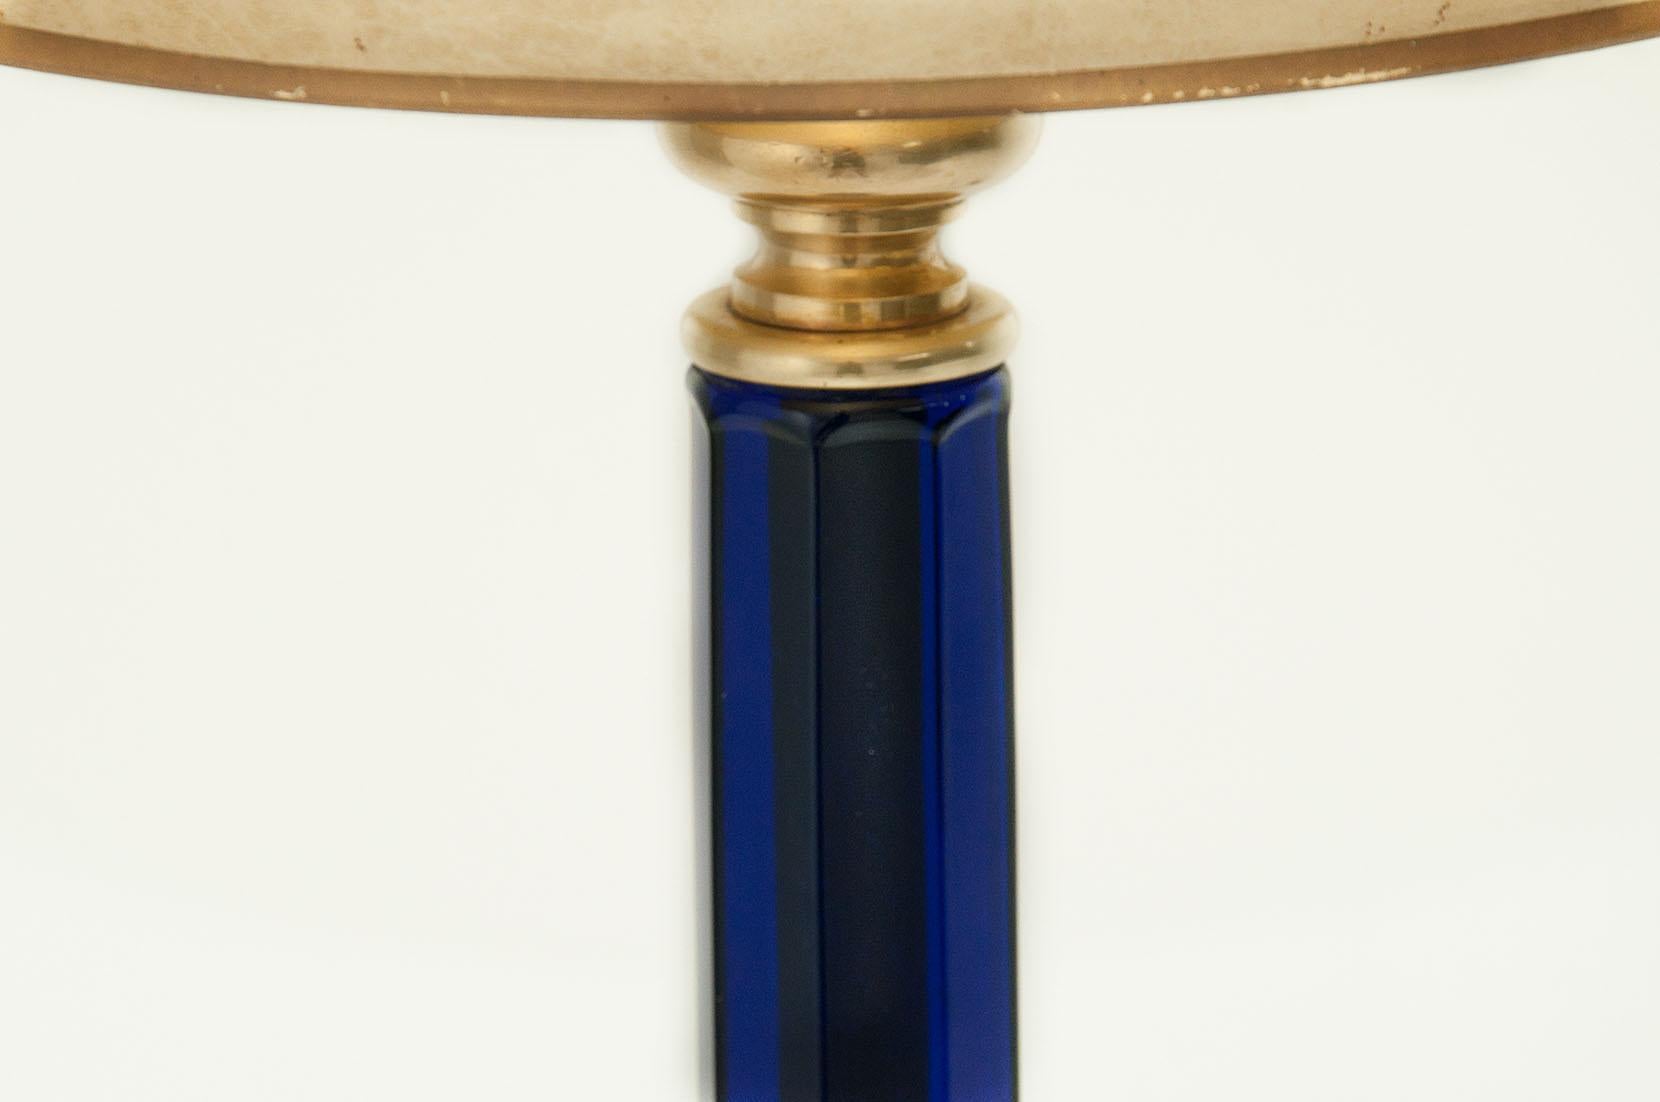 This lamp is feeting very well, with American classical decoration style. The diameter of the lamp only is 15cm, and the height with the shade is 80 cm. The blue of the item gives a sensation of deepness, and luxury. The lamp may be from Murano,